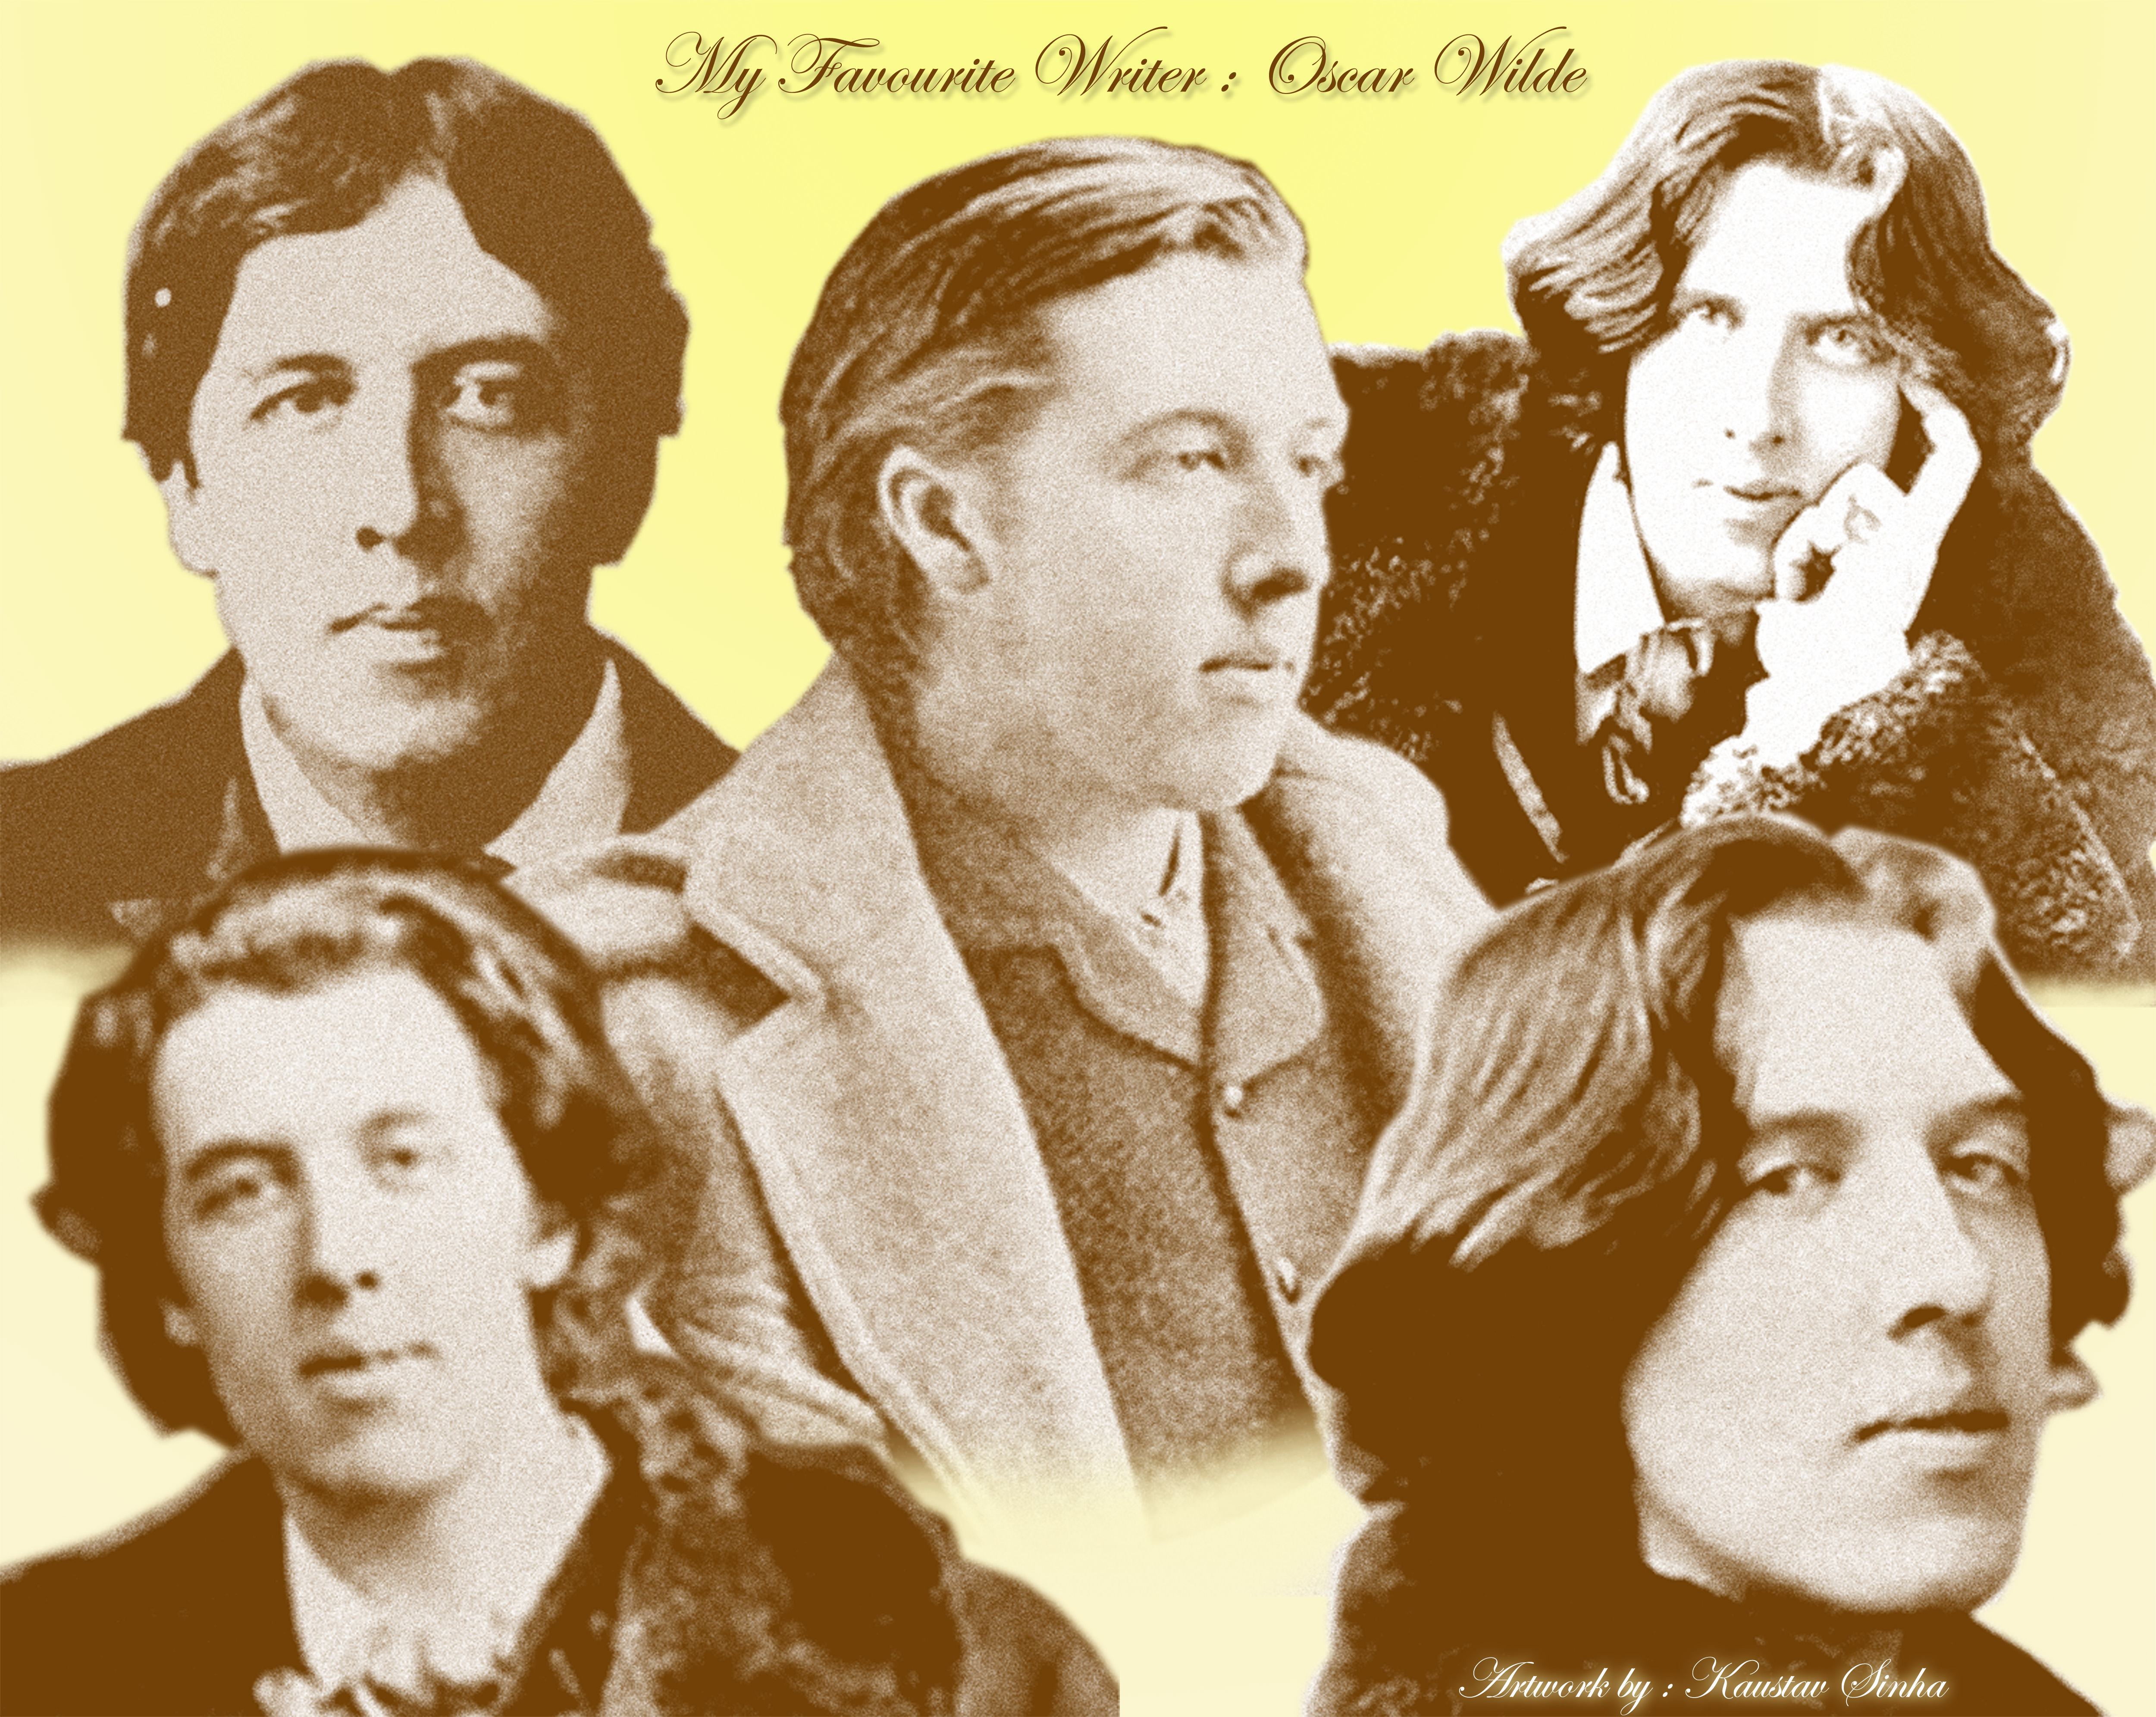 My favorite author, Oscar Wilde; I wish to produce a film inspired from his works one day!